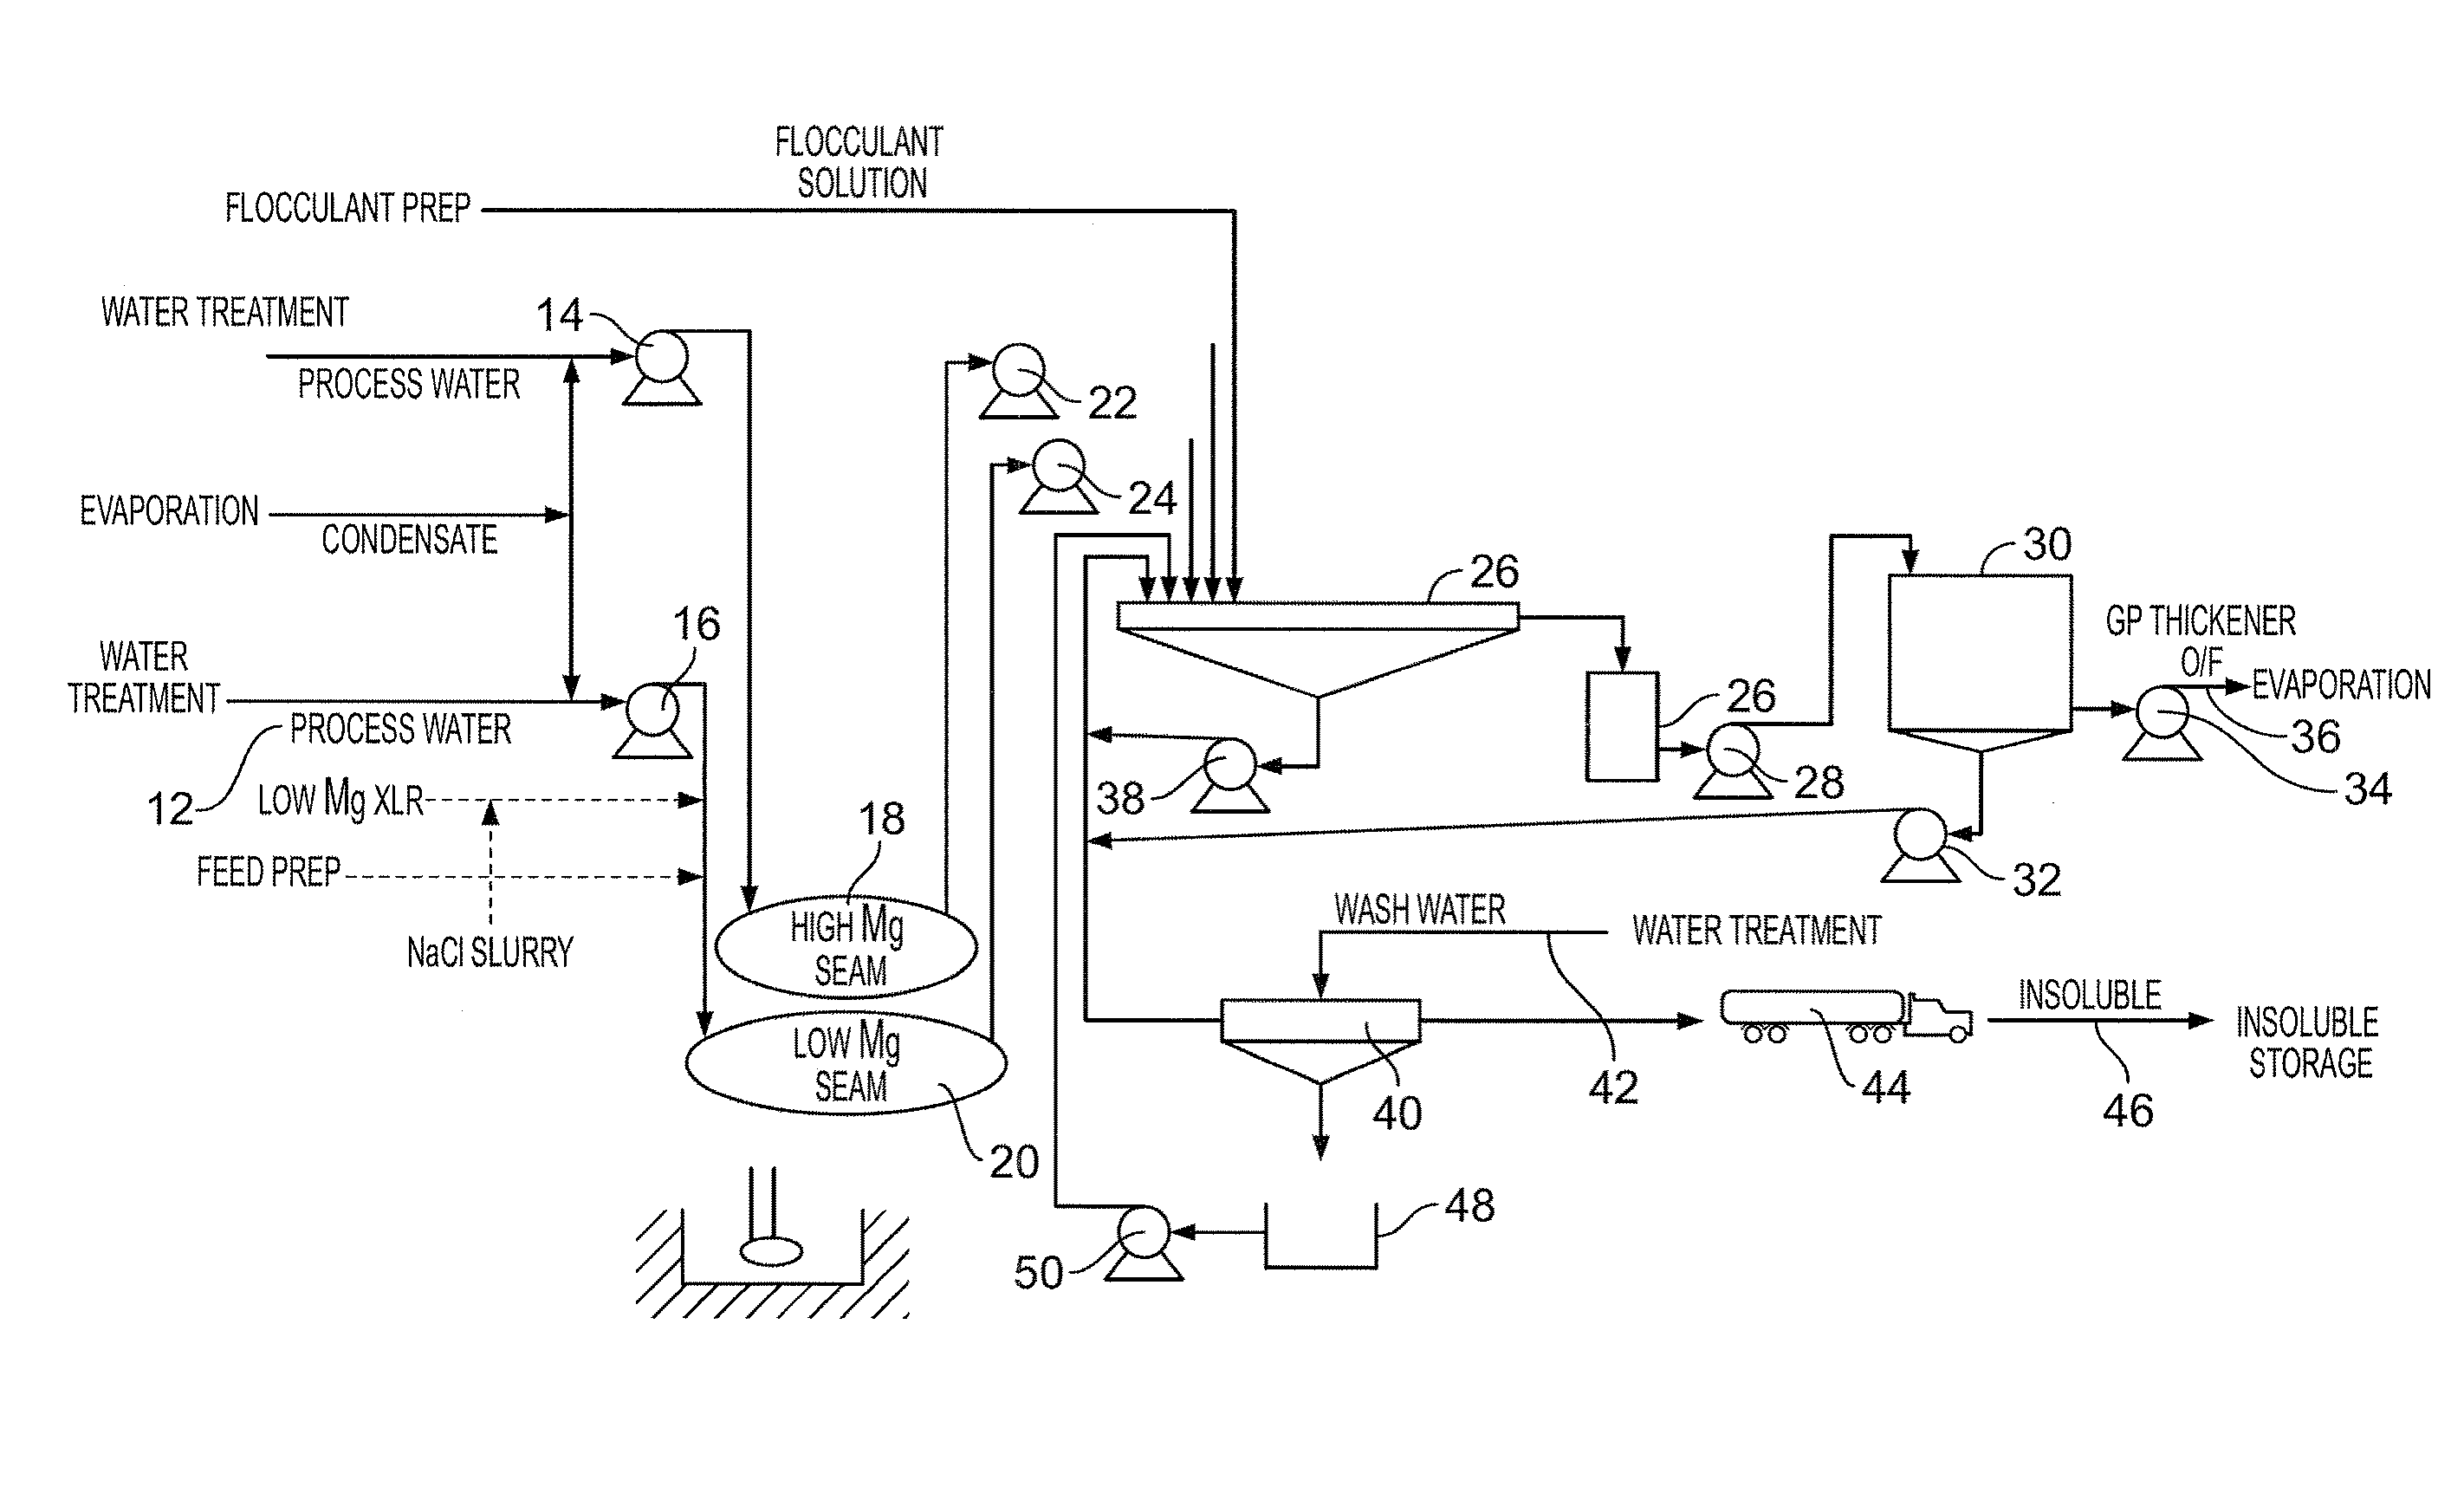 Process for the formulation of potassium chloride from a carnallite source